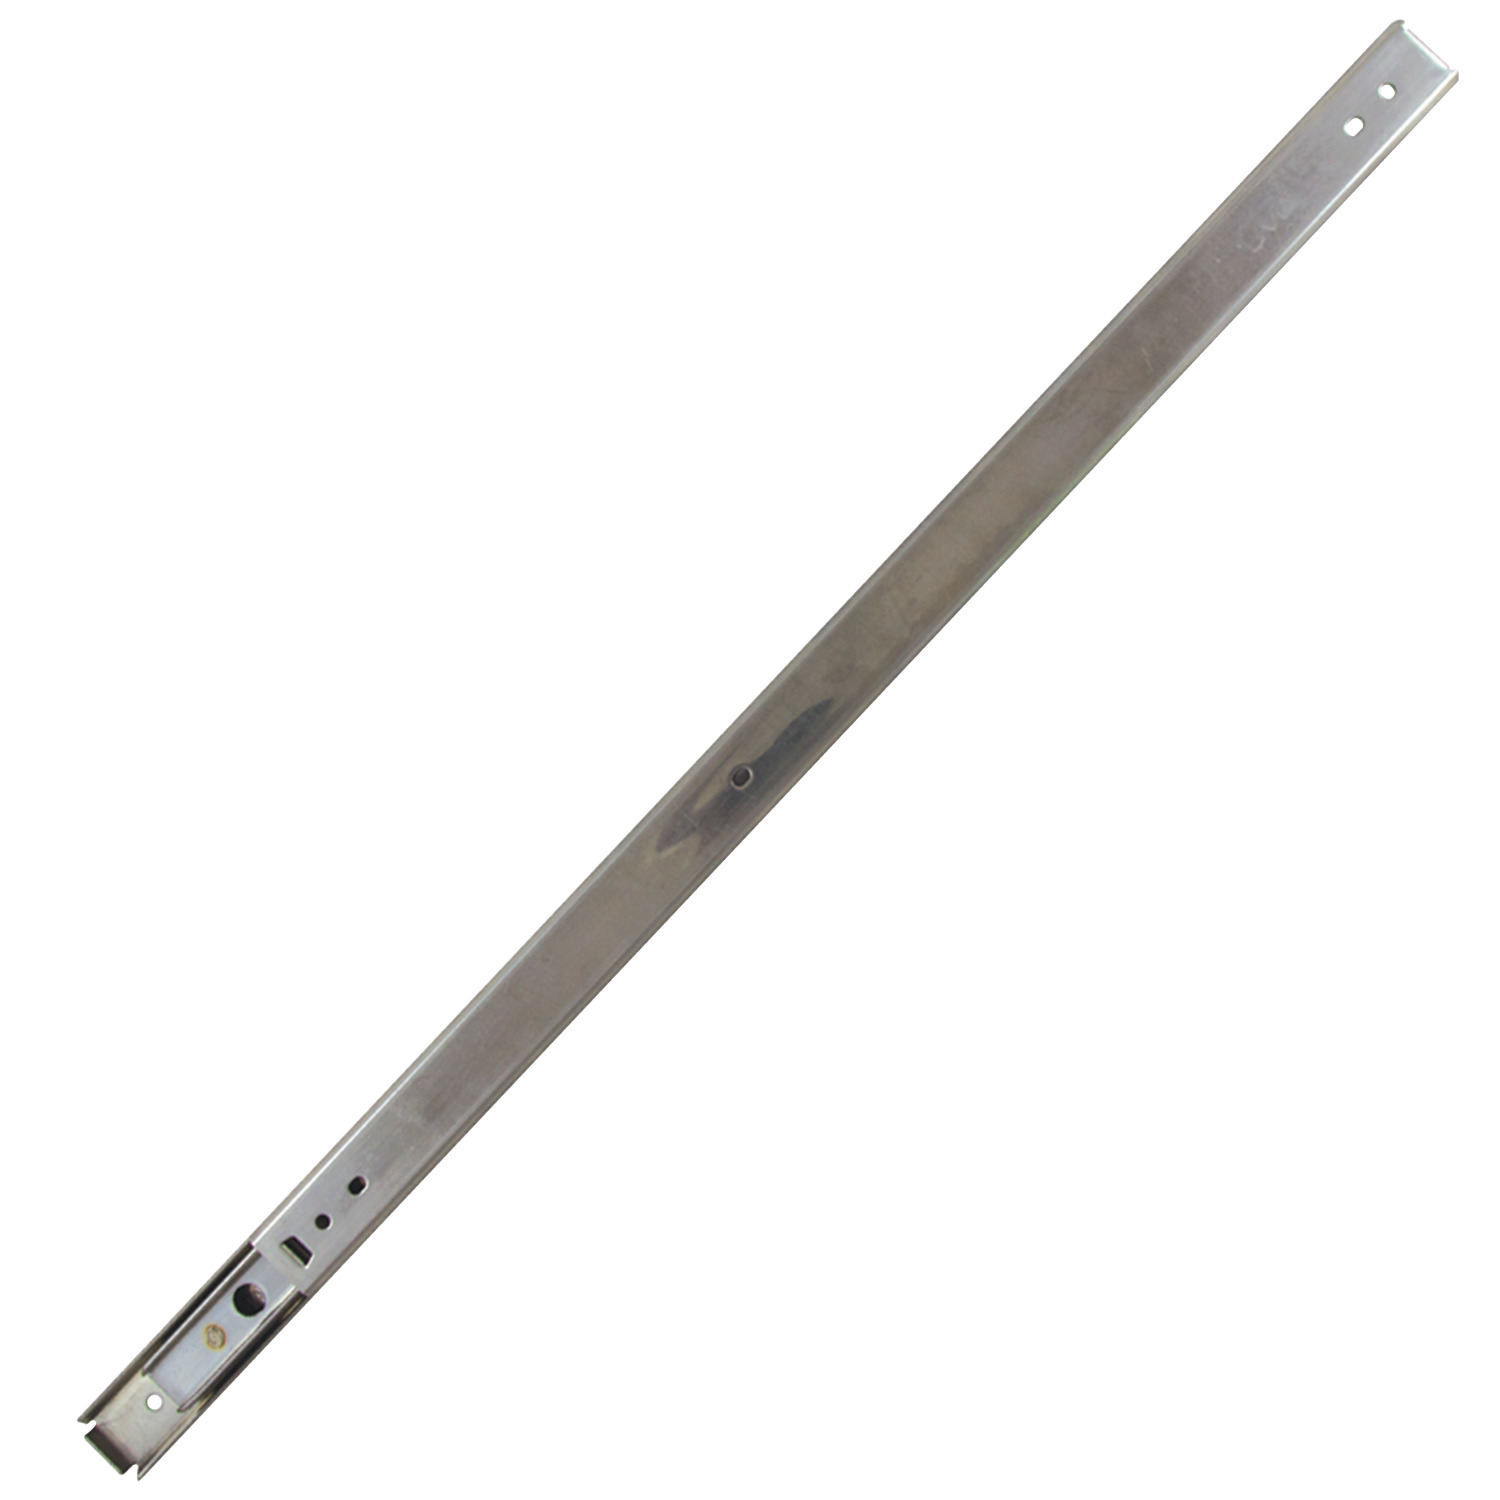 P7100.AC0200 Drawer Slide Full Extension Length 200; Load 30kg per pair. Sold Individually. Stainless